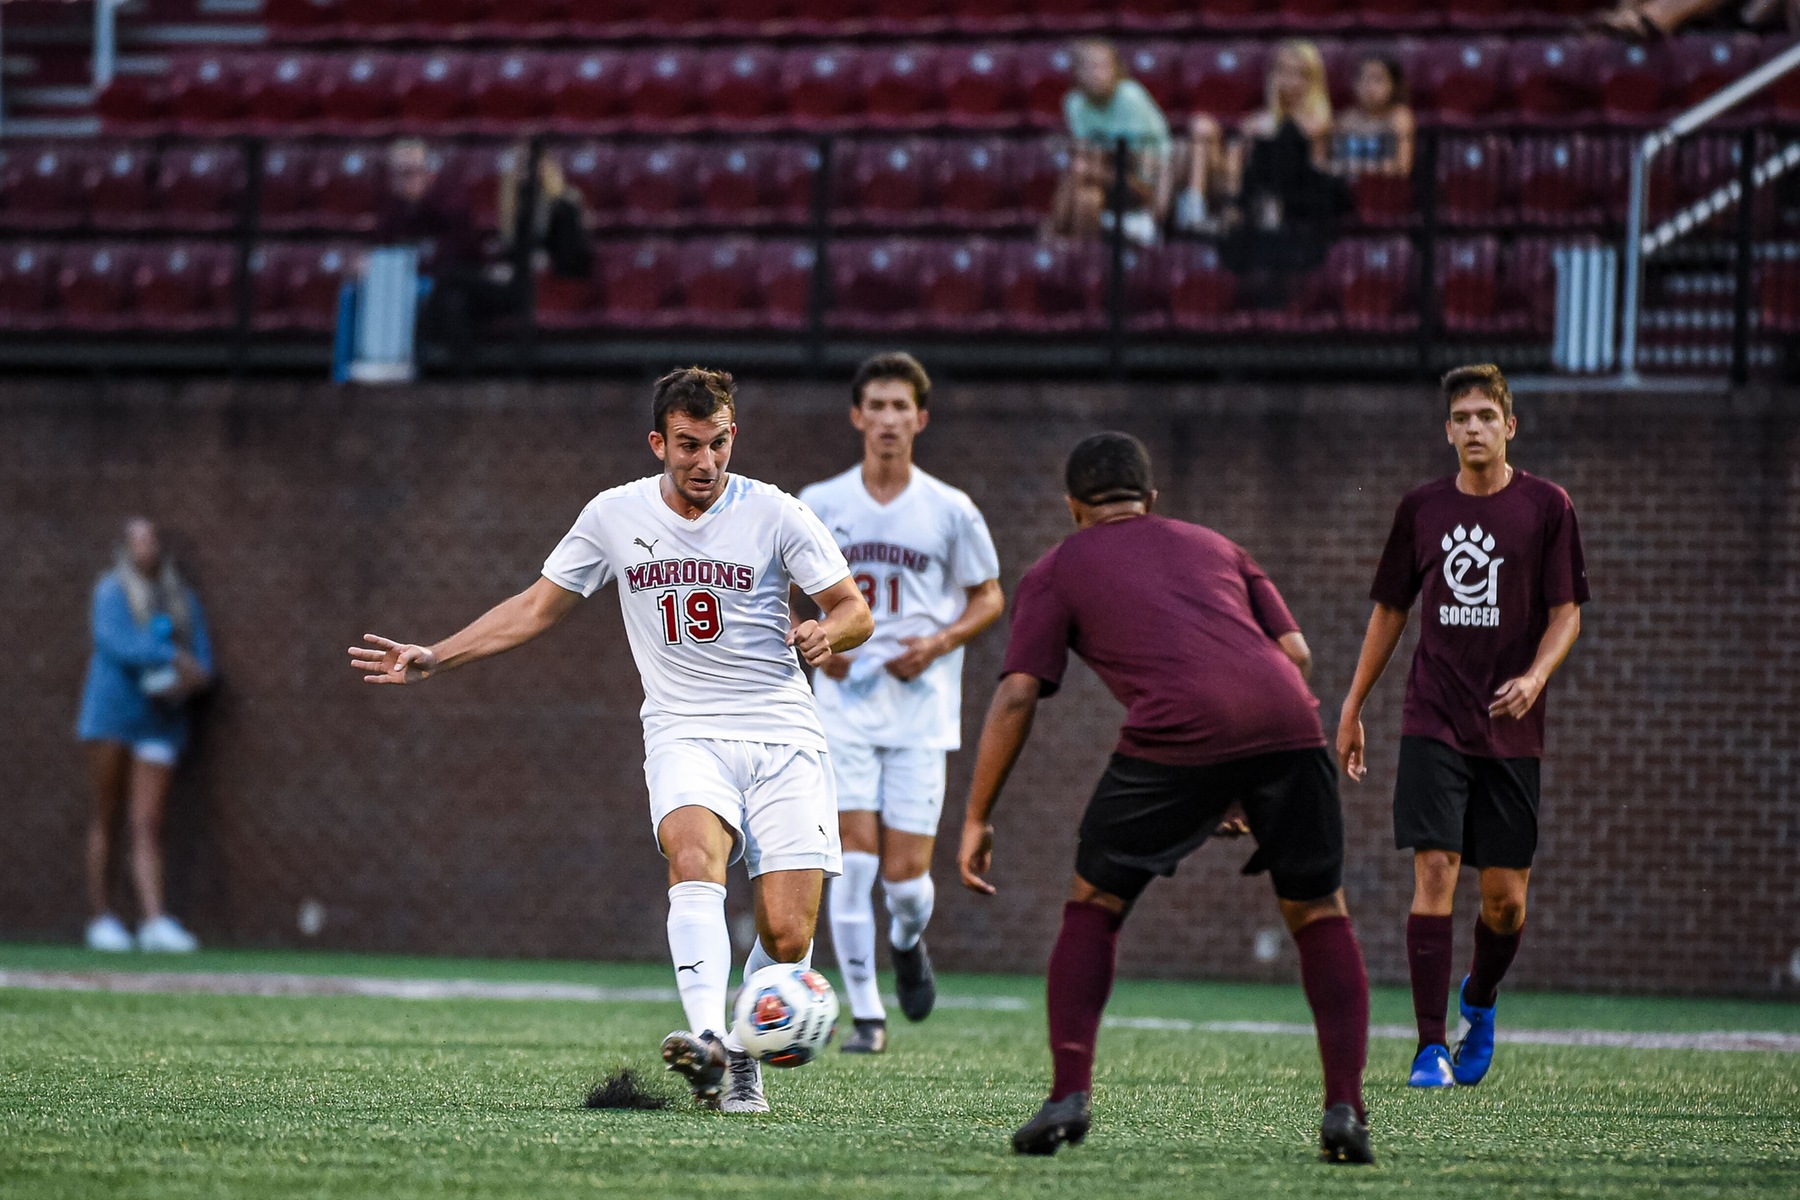 Liam Camilleri had one of three second-half goals for the Maroons at EMU.